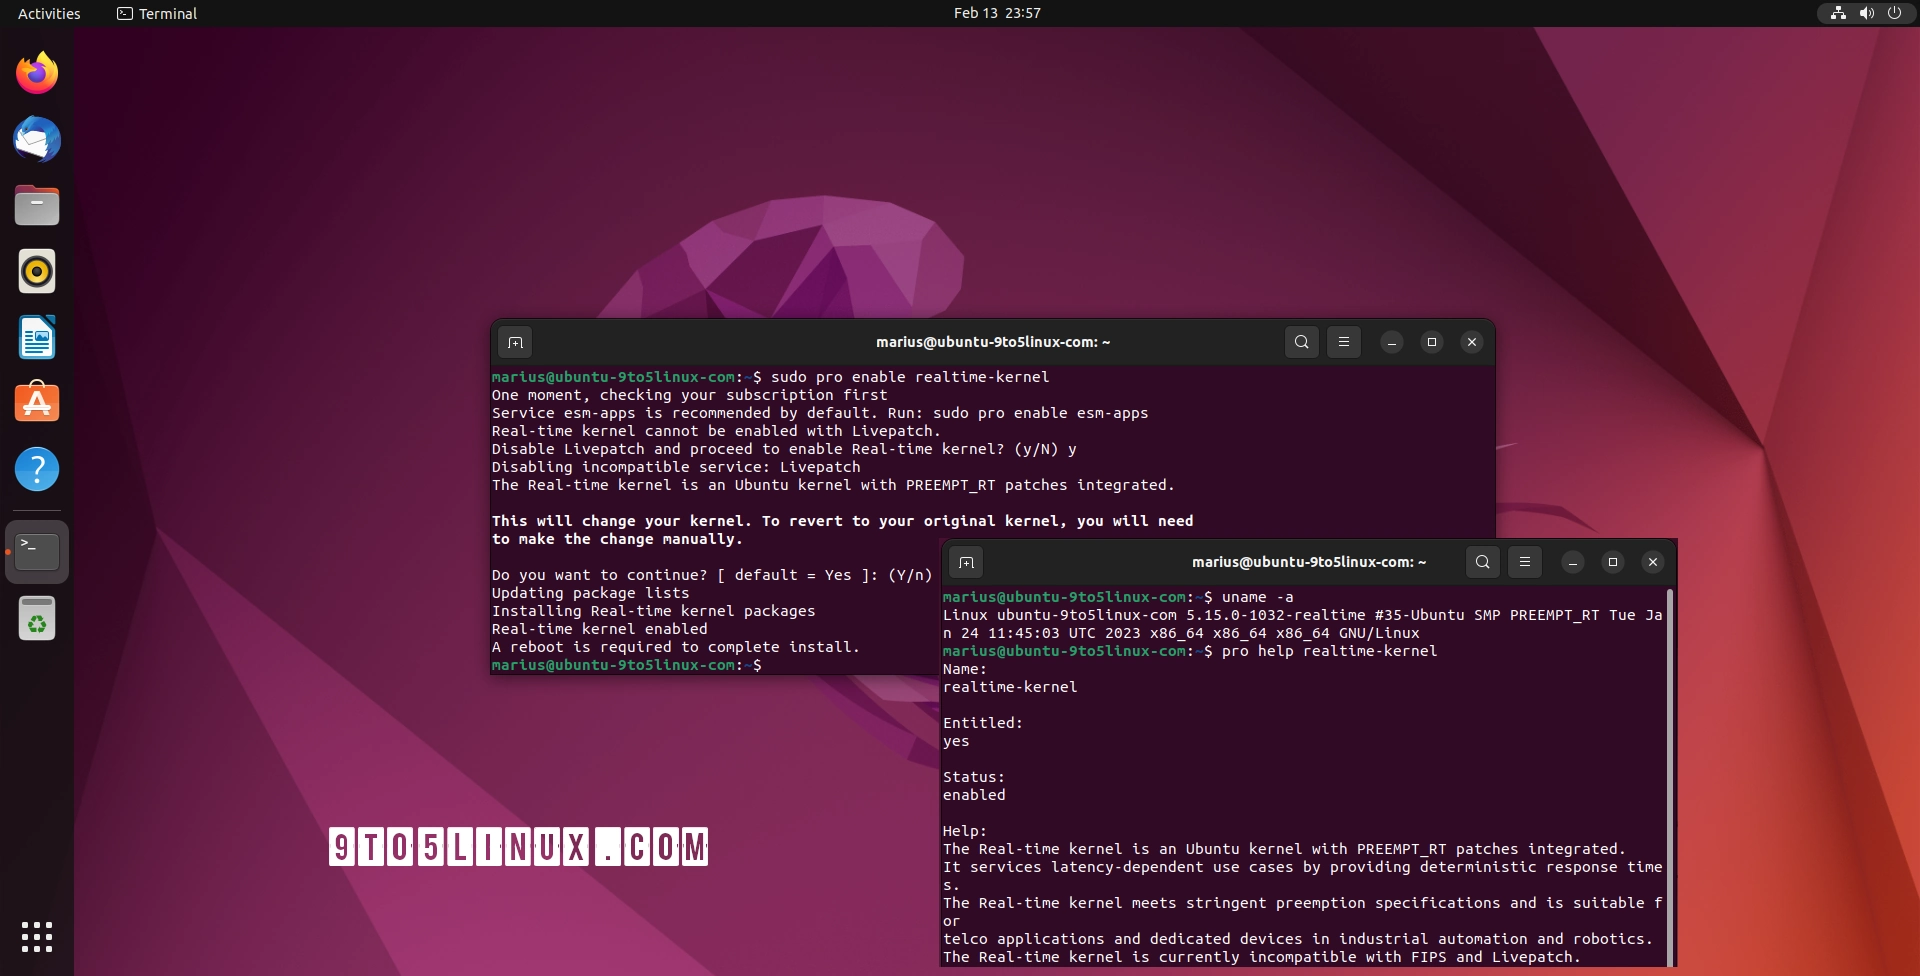 Canonical Announces General Availability of Real-Time Ubuntu Kernel